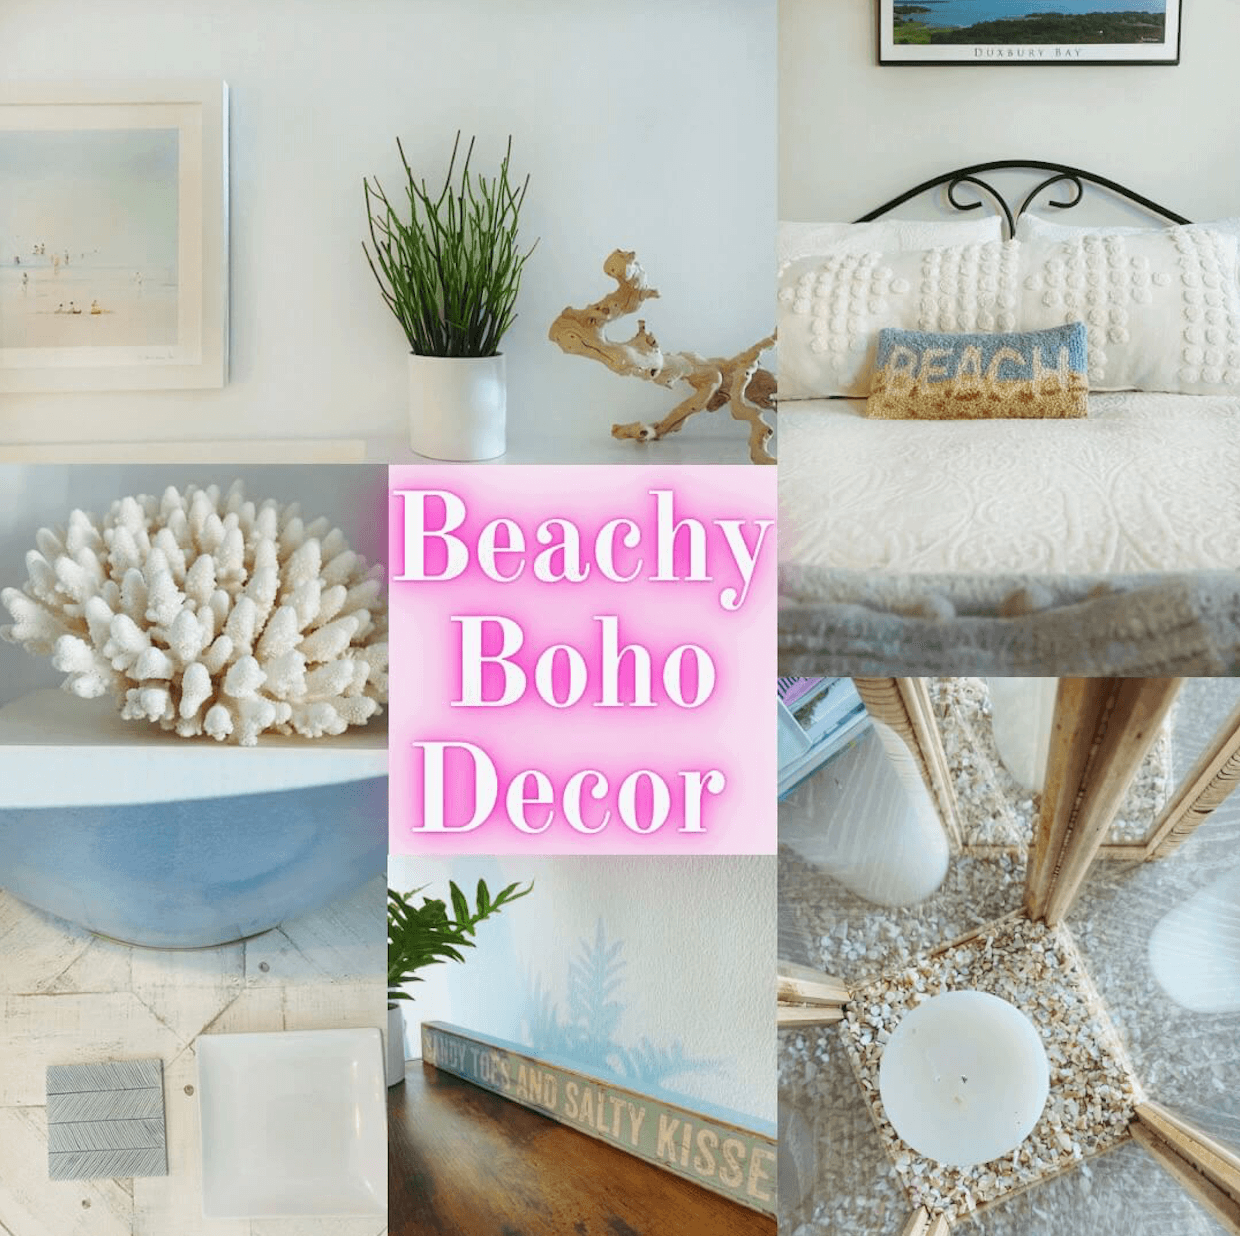 Image of a collage of a pictures with beach boho decor written across in word art